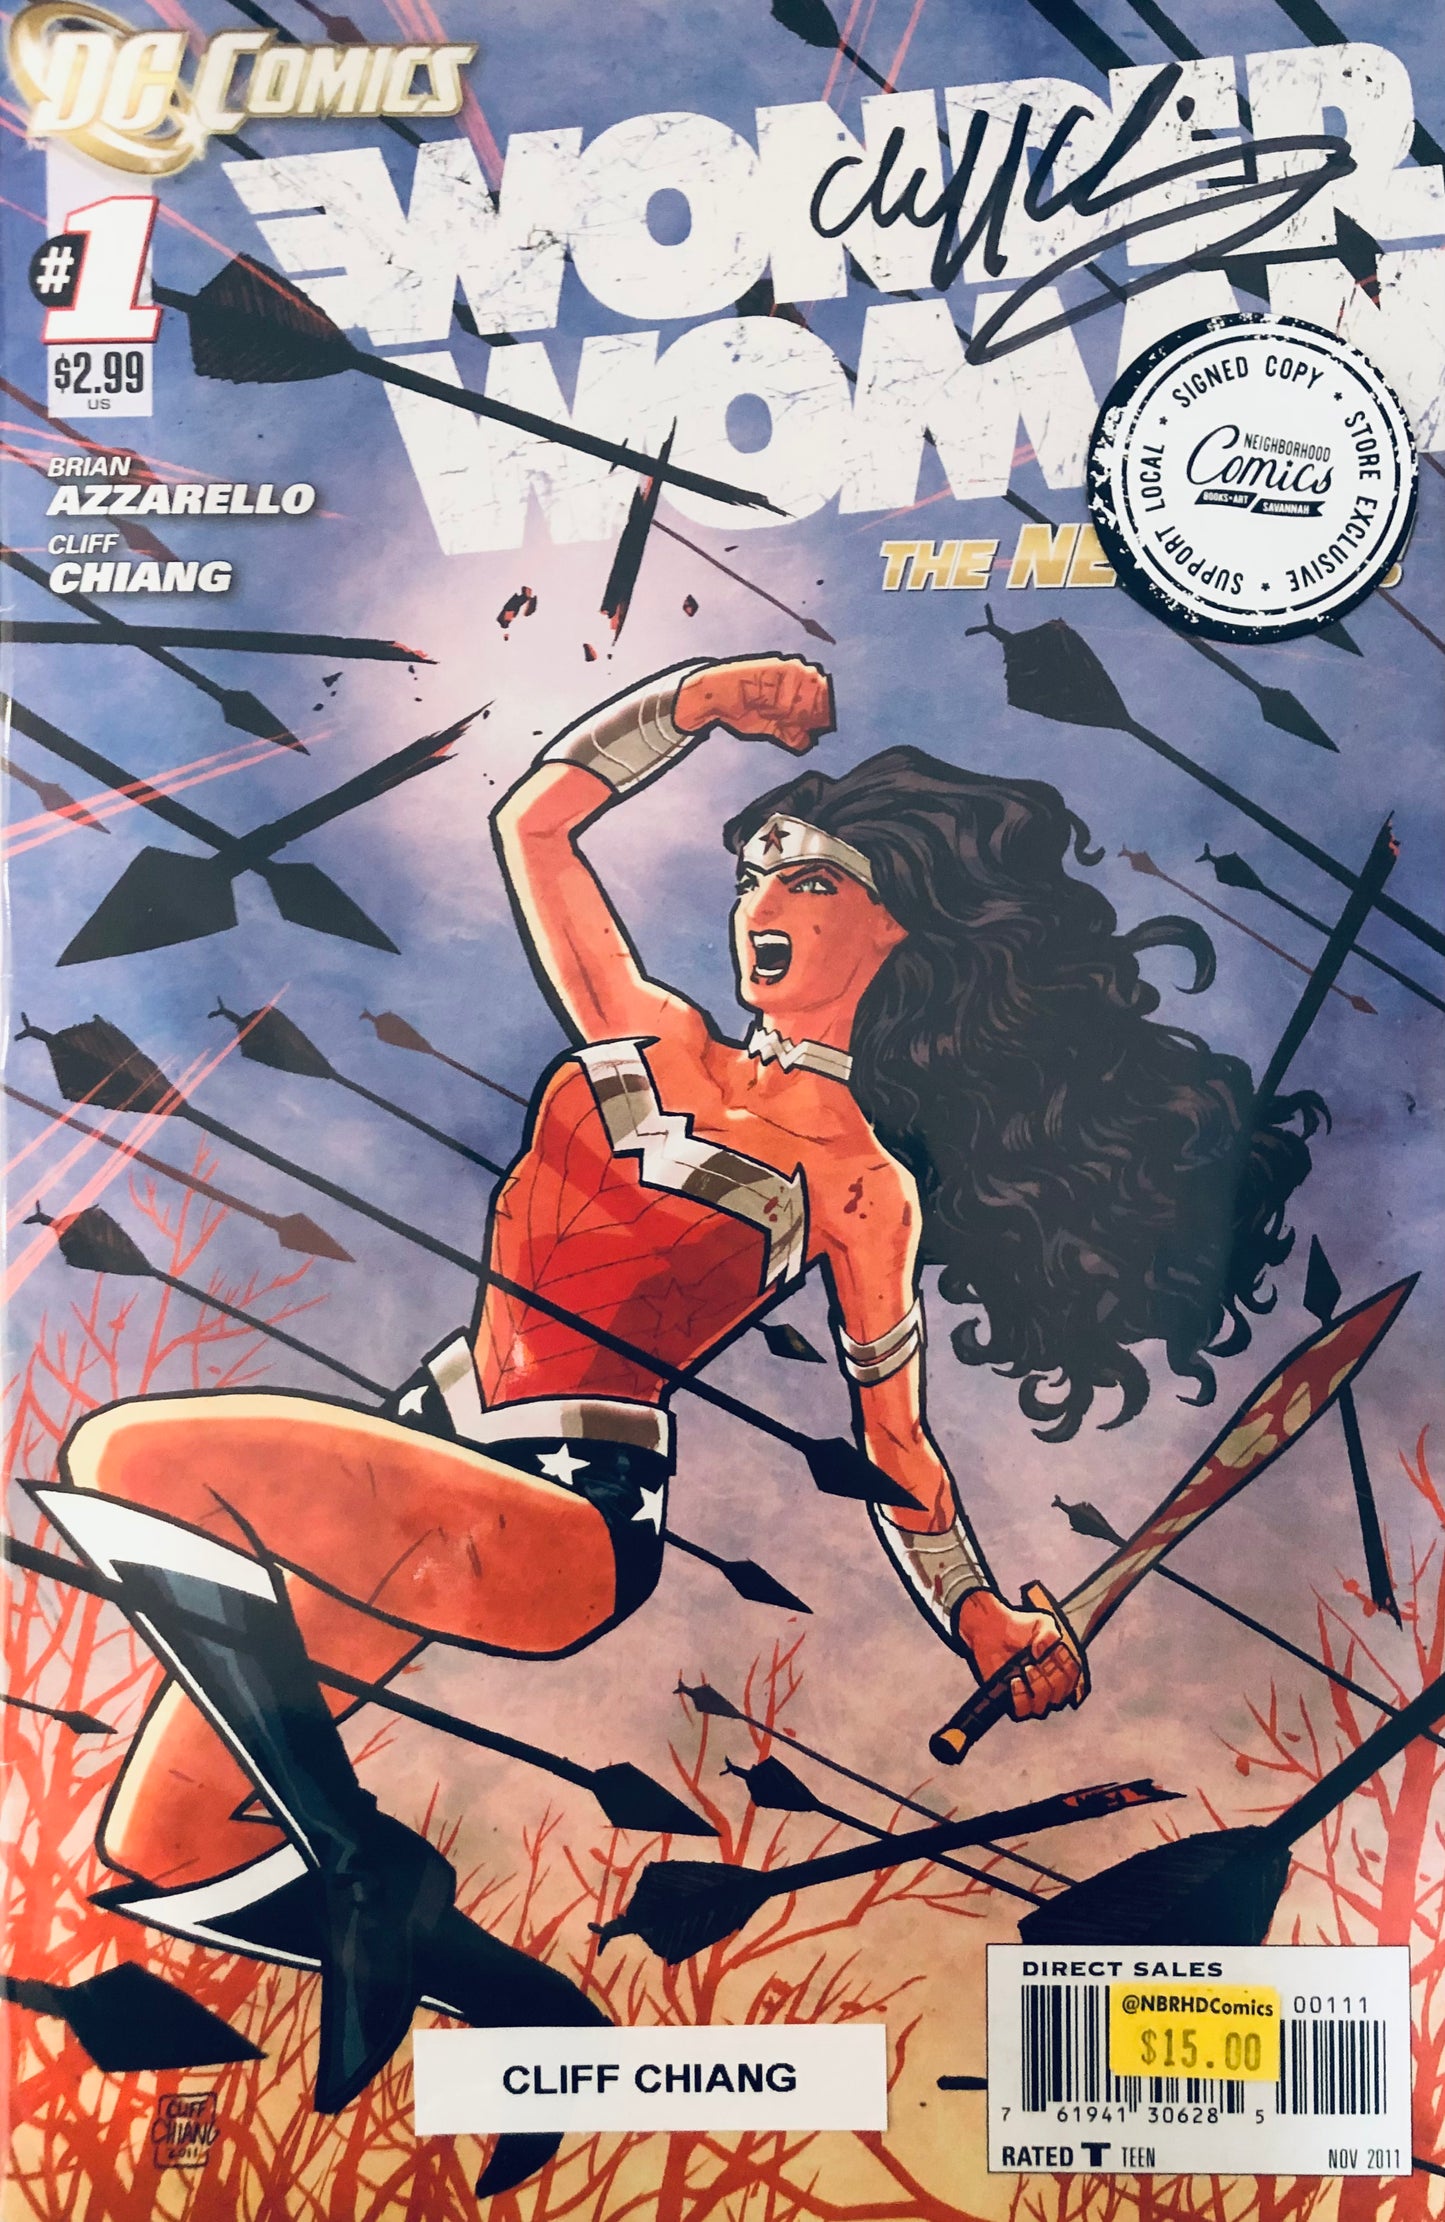 Wonder Woman New 52 #1: Cliff Chiang (Signed)